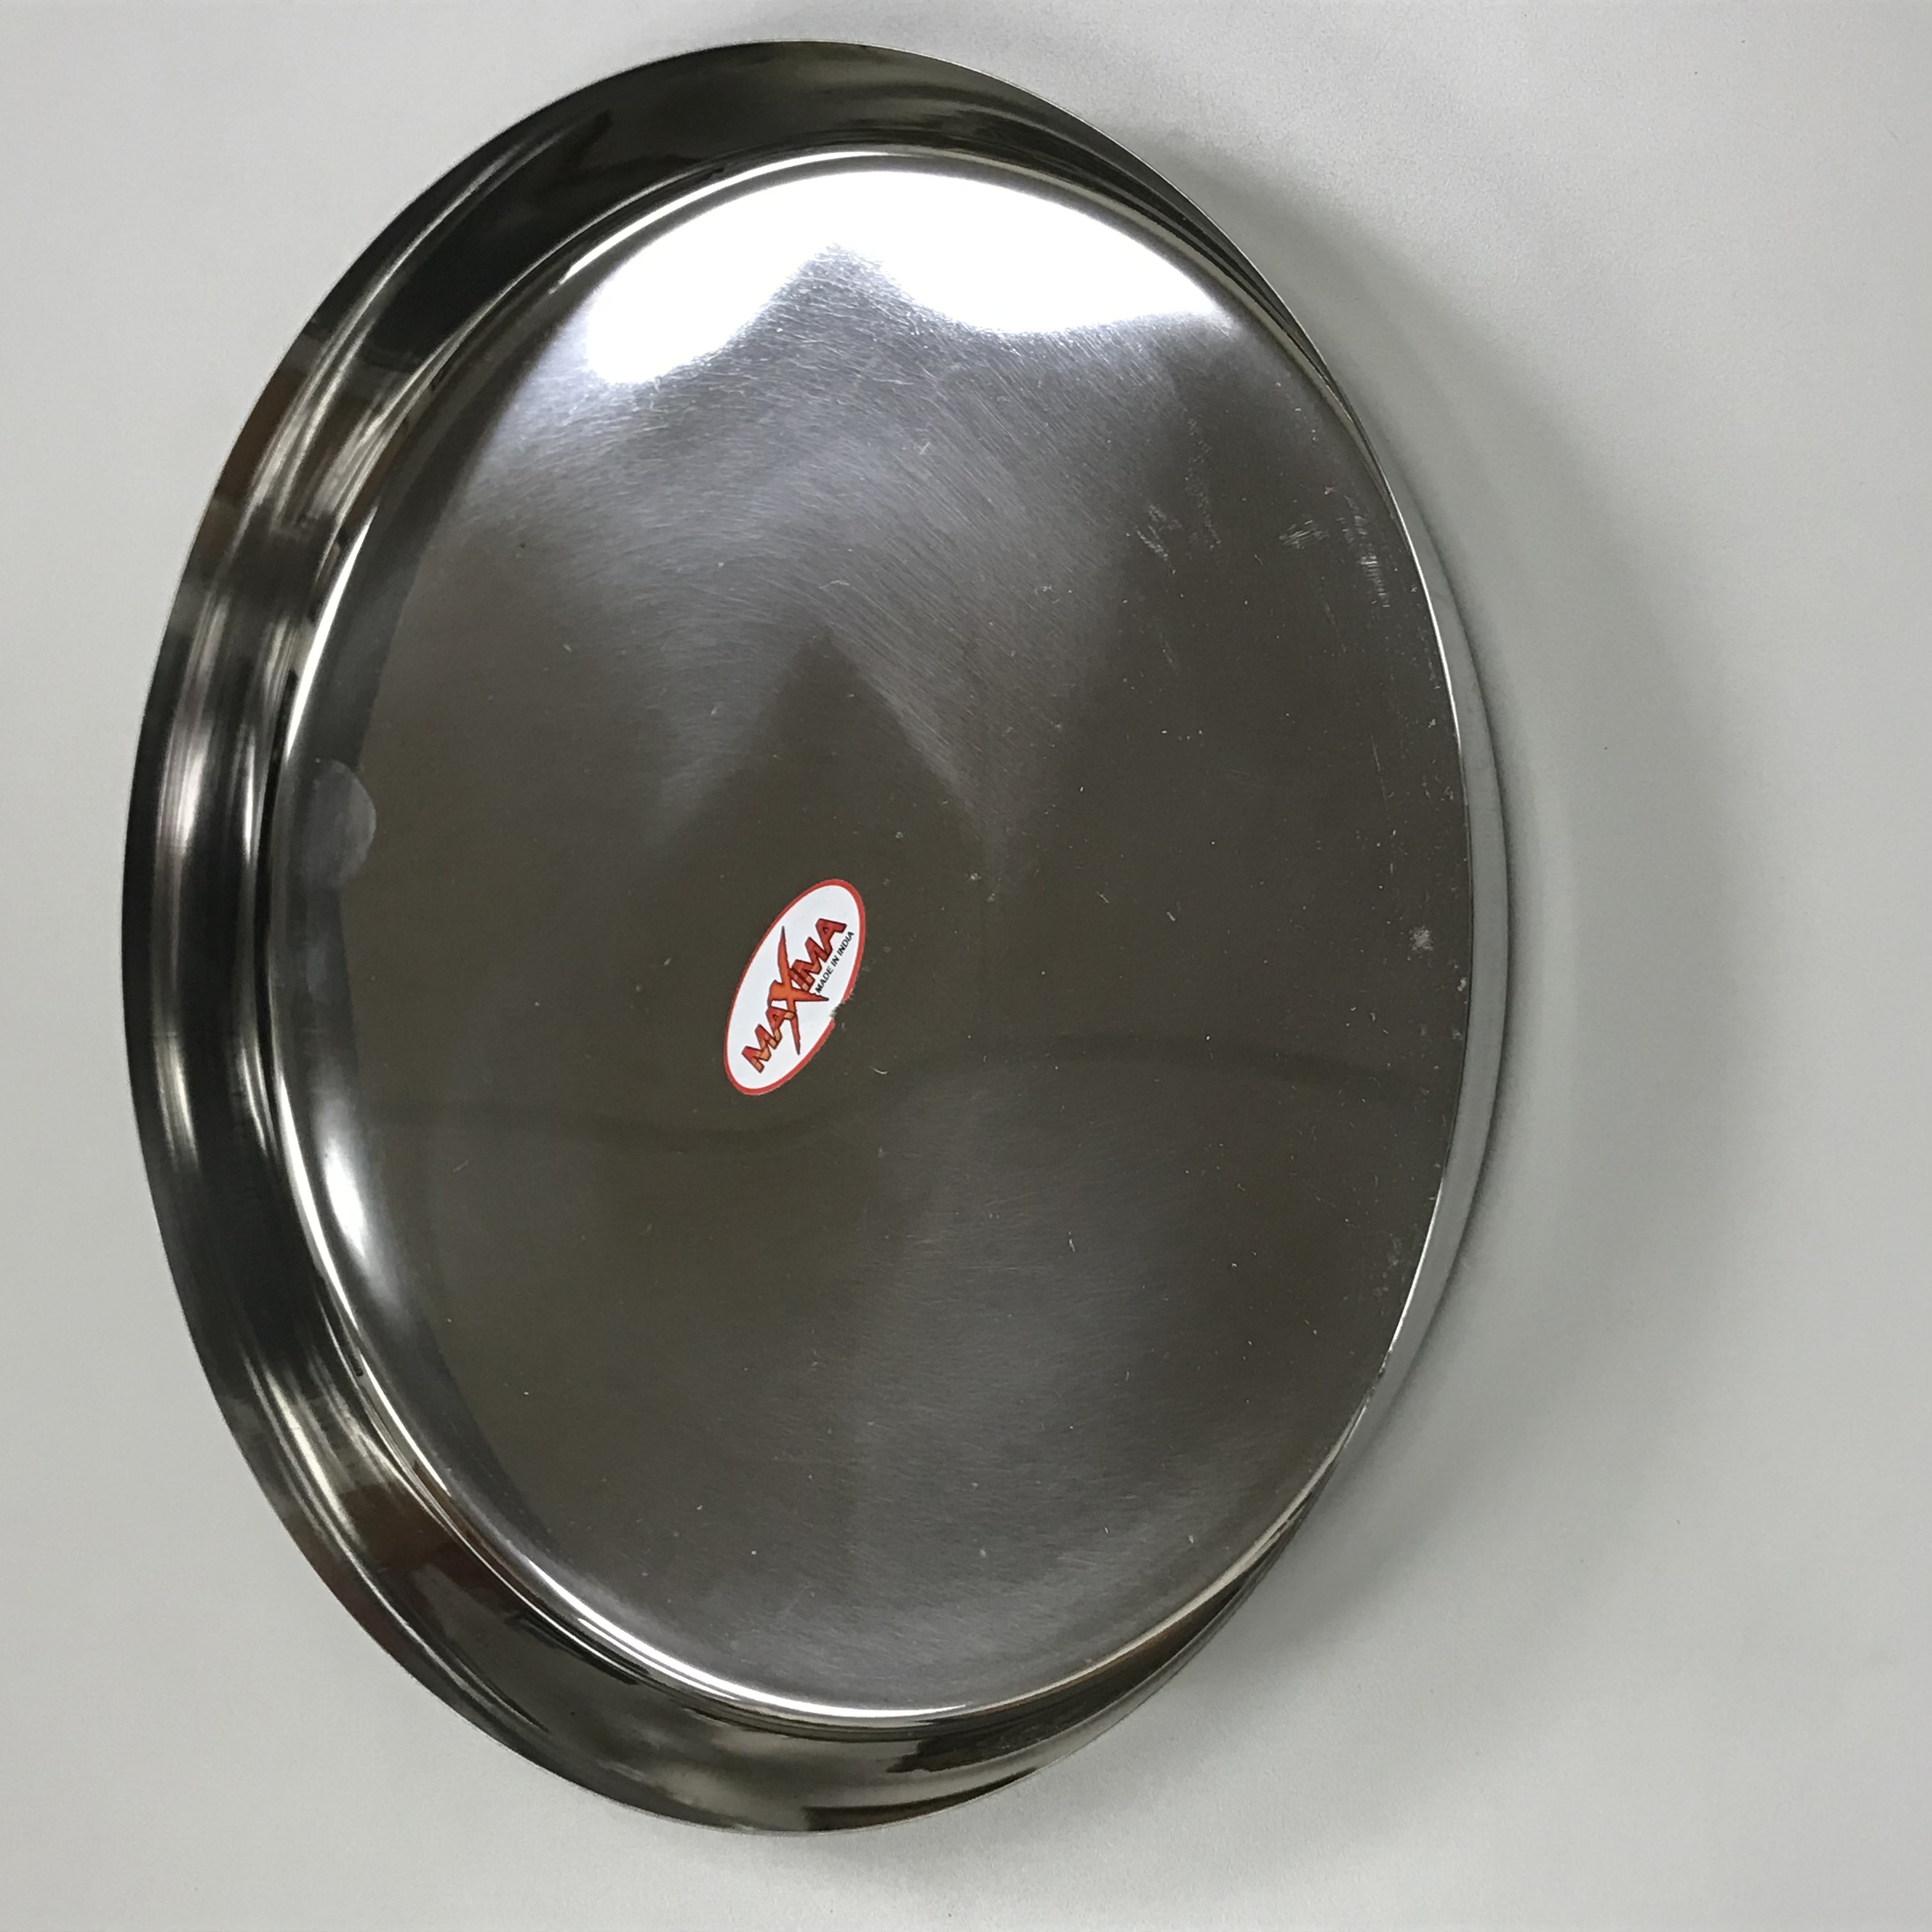 Eris 13" Steel Dinner Plate with Wall - Thali